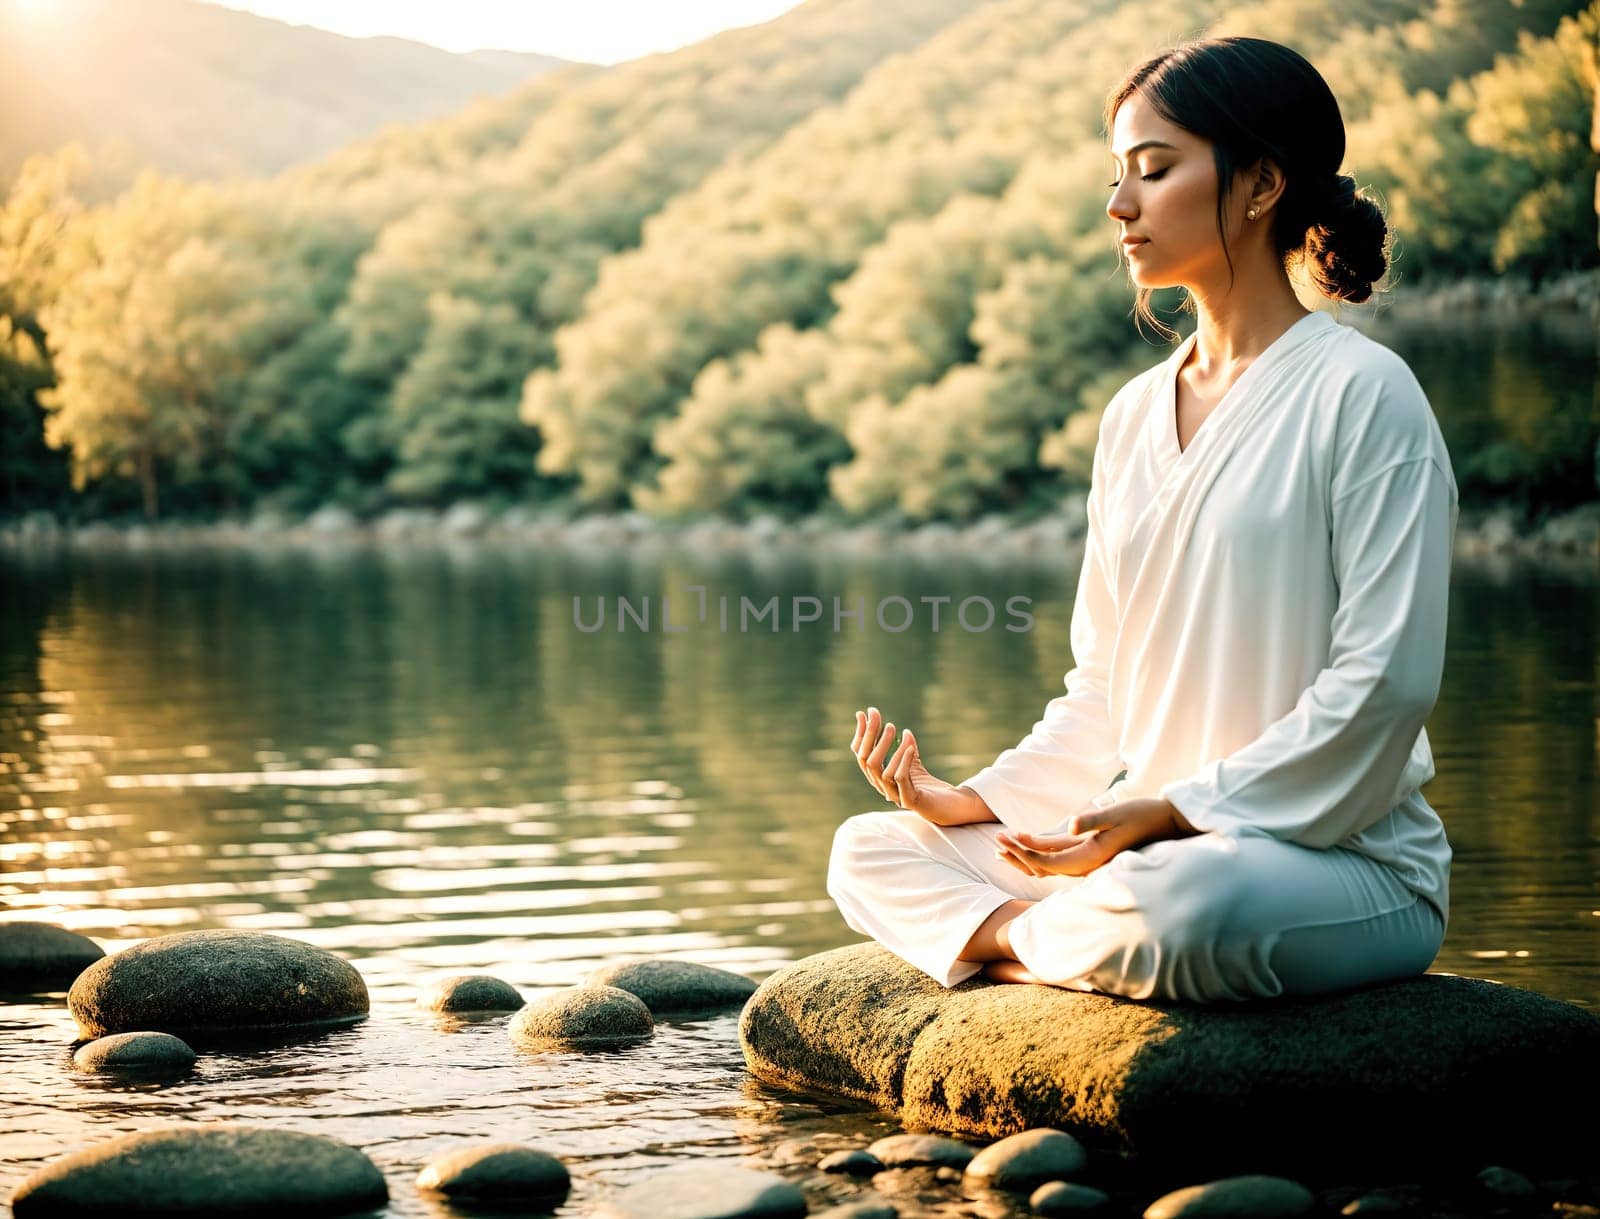 A woman sitting on a rock in the middle of a river, meditating. by creart